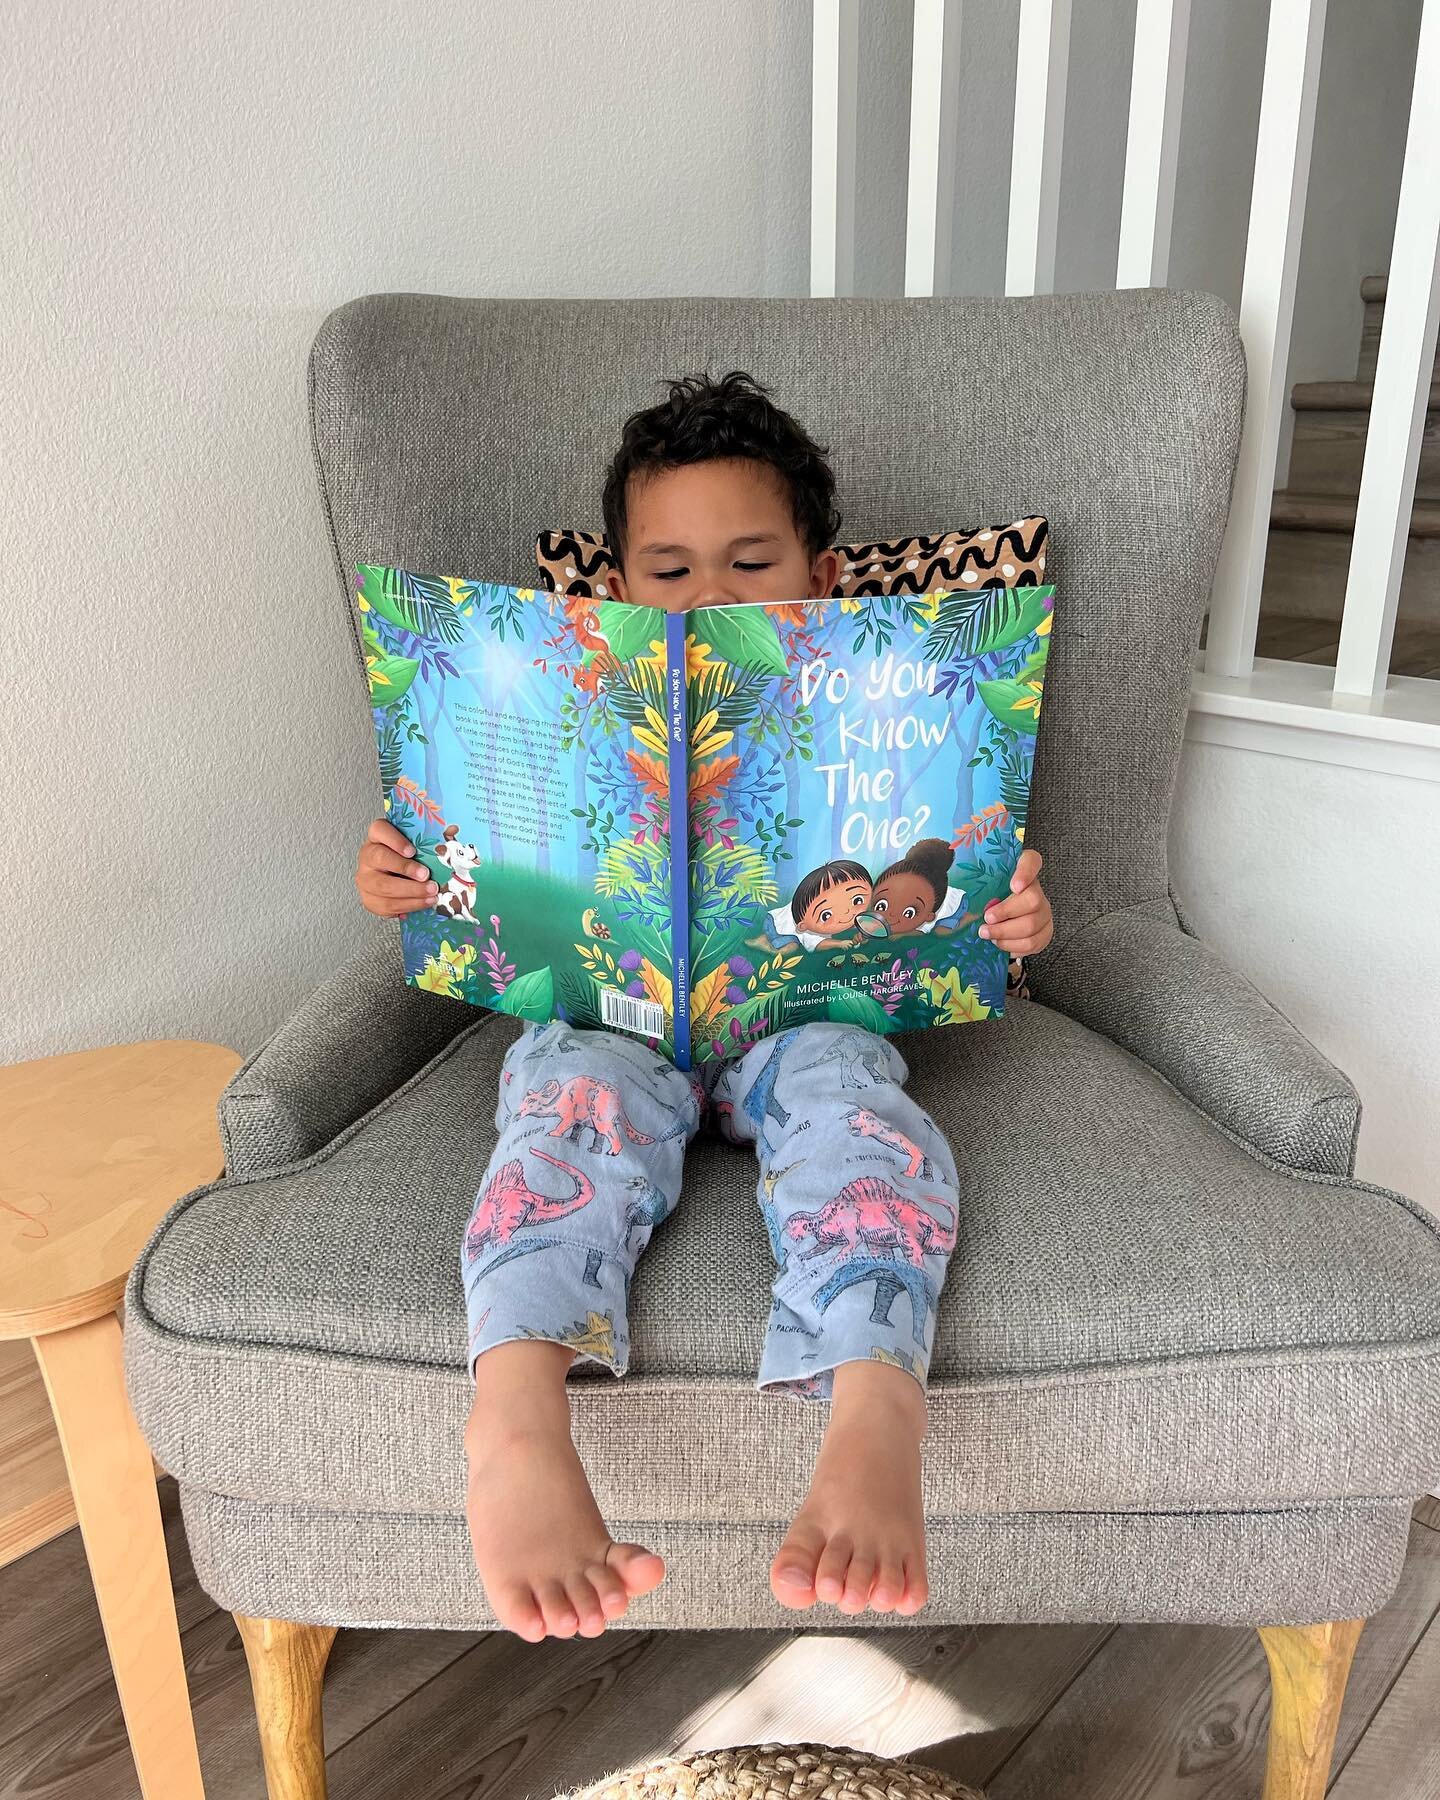 Nothin better than reading a good book in your jammies!! ❤️❤️❤️❤️❤️❤️ @michellekimmccoy